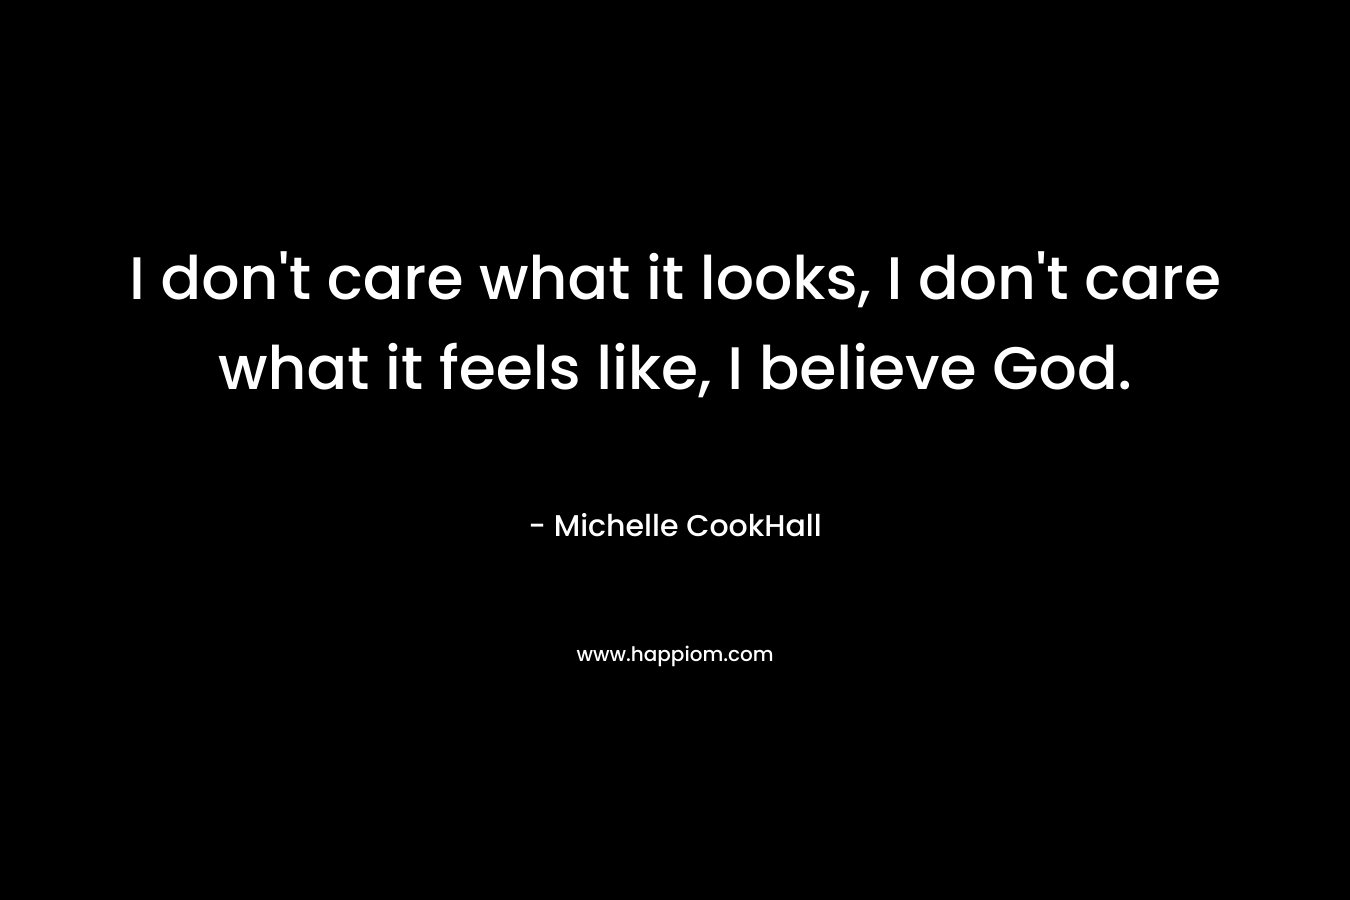 I don't care what it looks, I don't care what it feels like, I believe God.